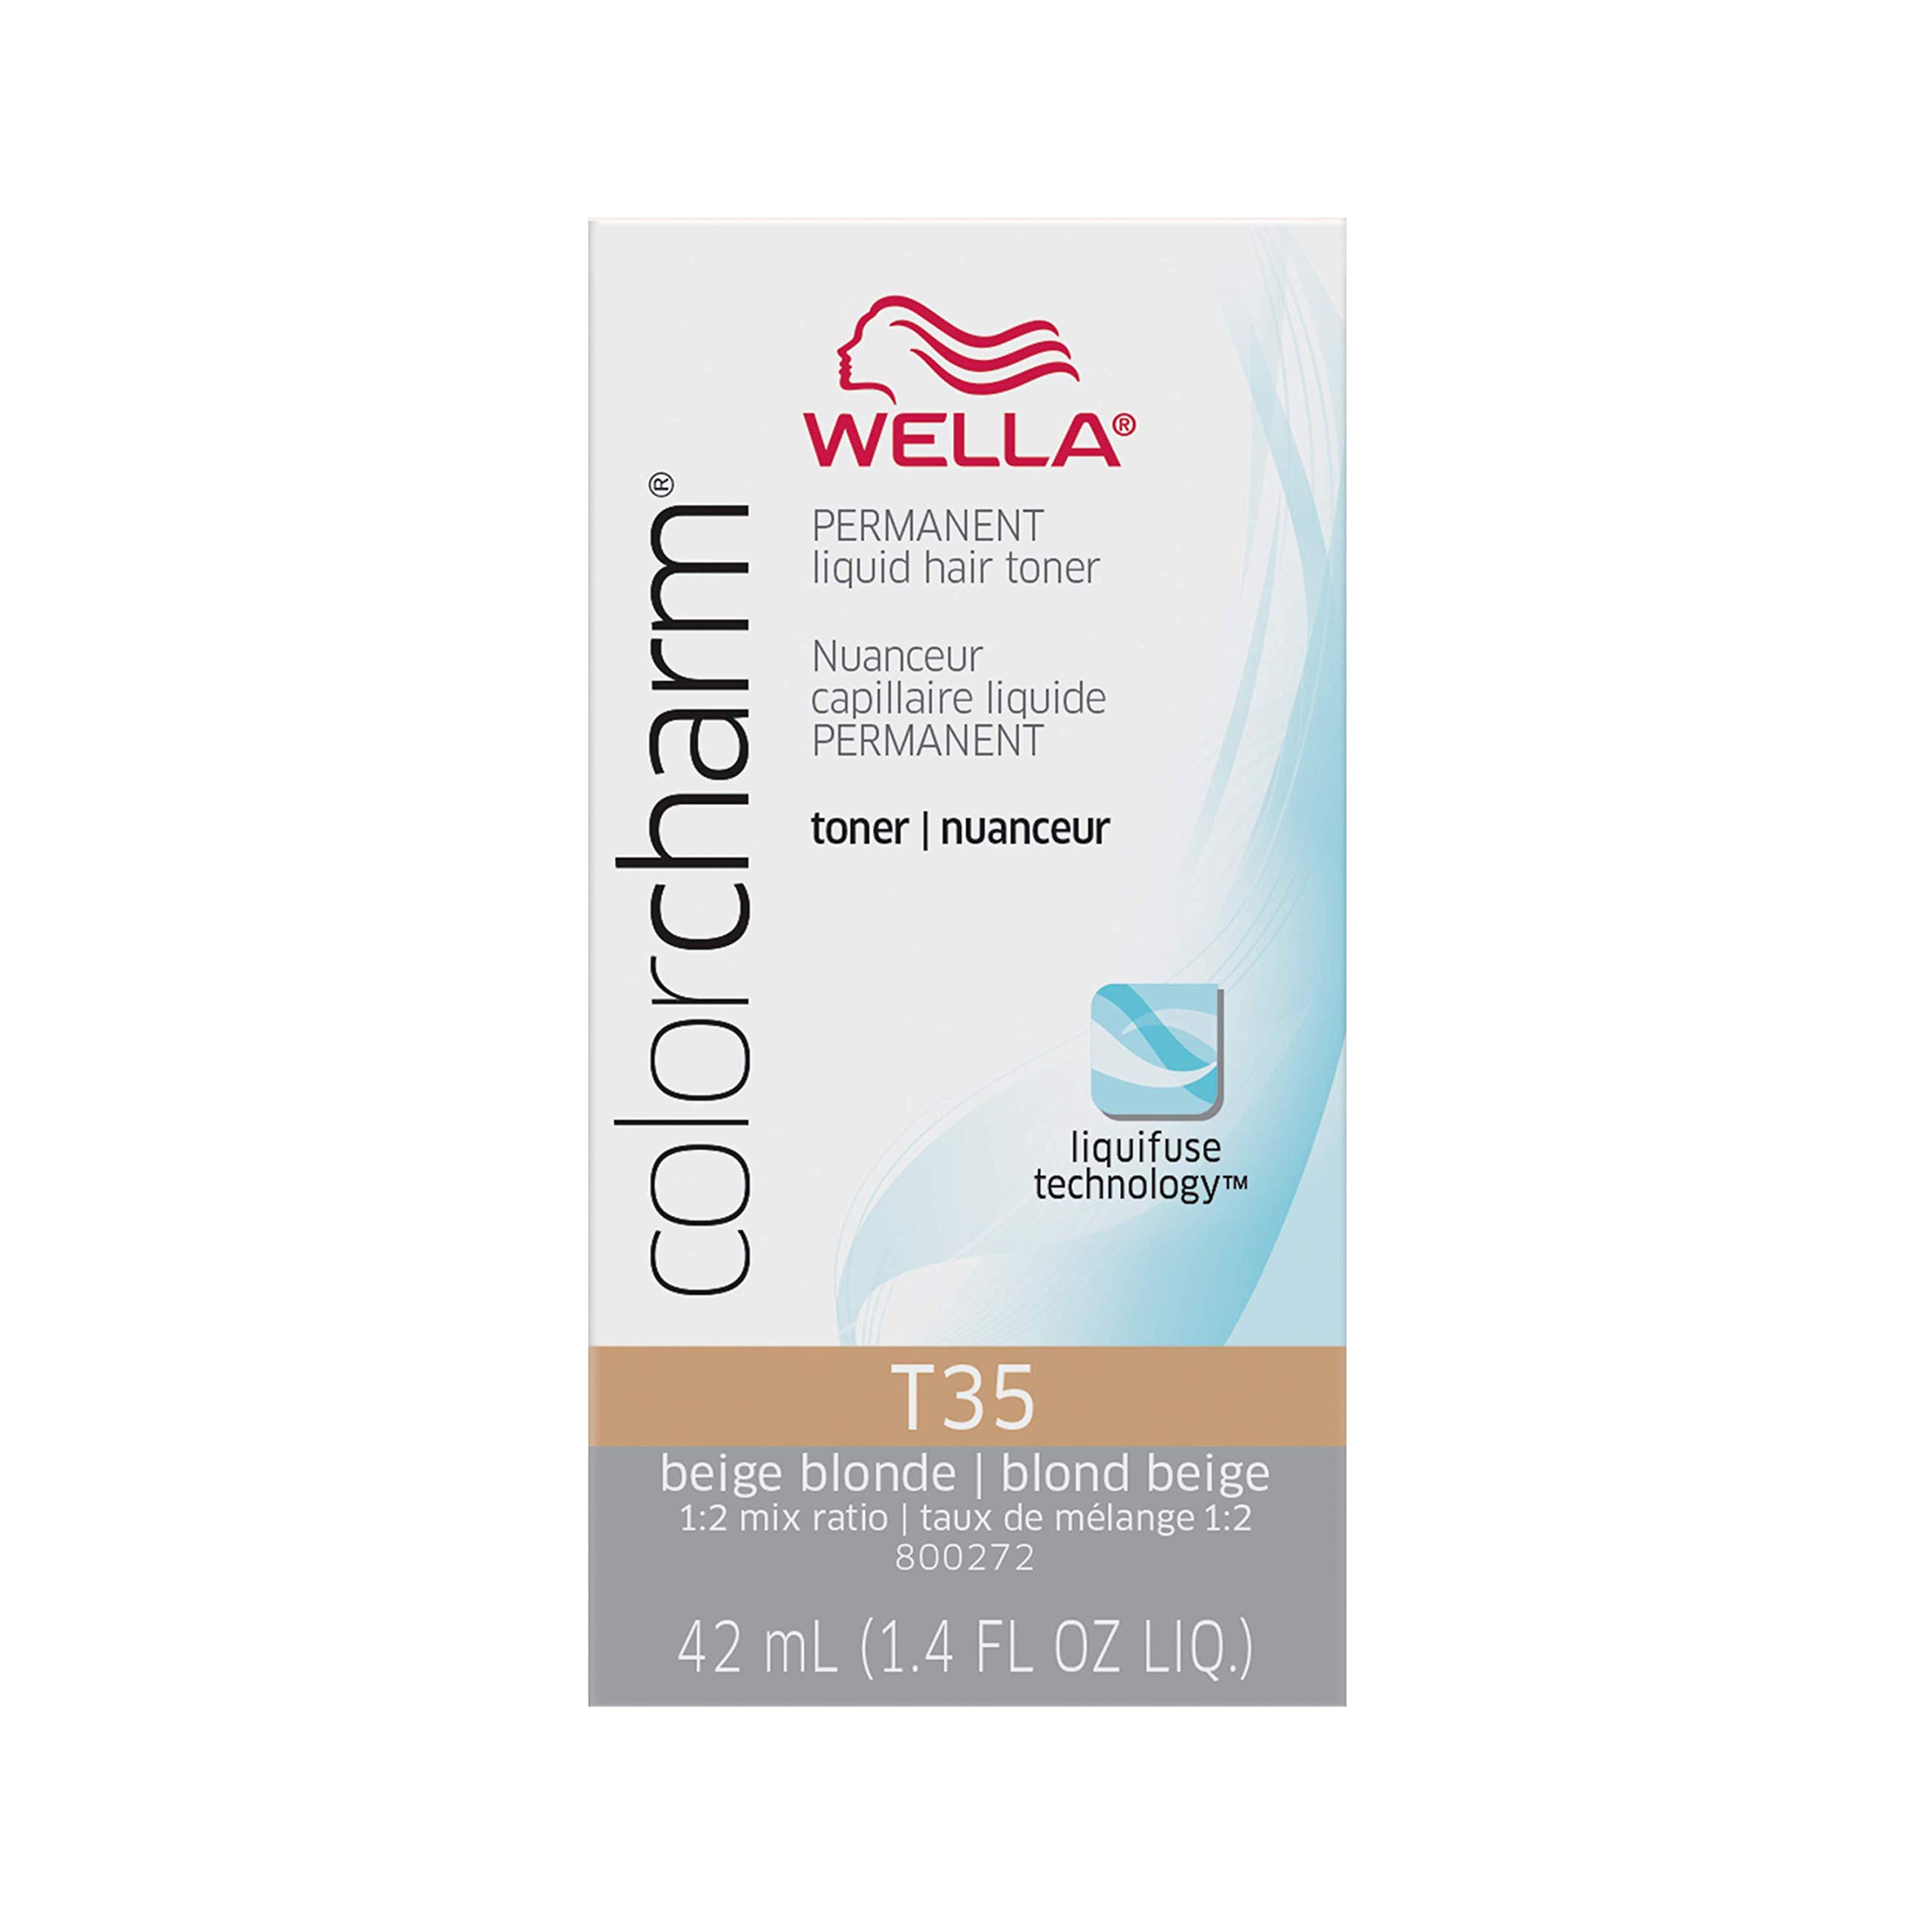 WELLA colorcharm Hair Toner, Neutralize Brass With Liquifuse Technology, T35 Beige Blonde, 1.4 oz